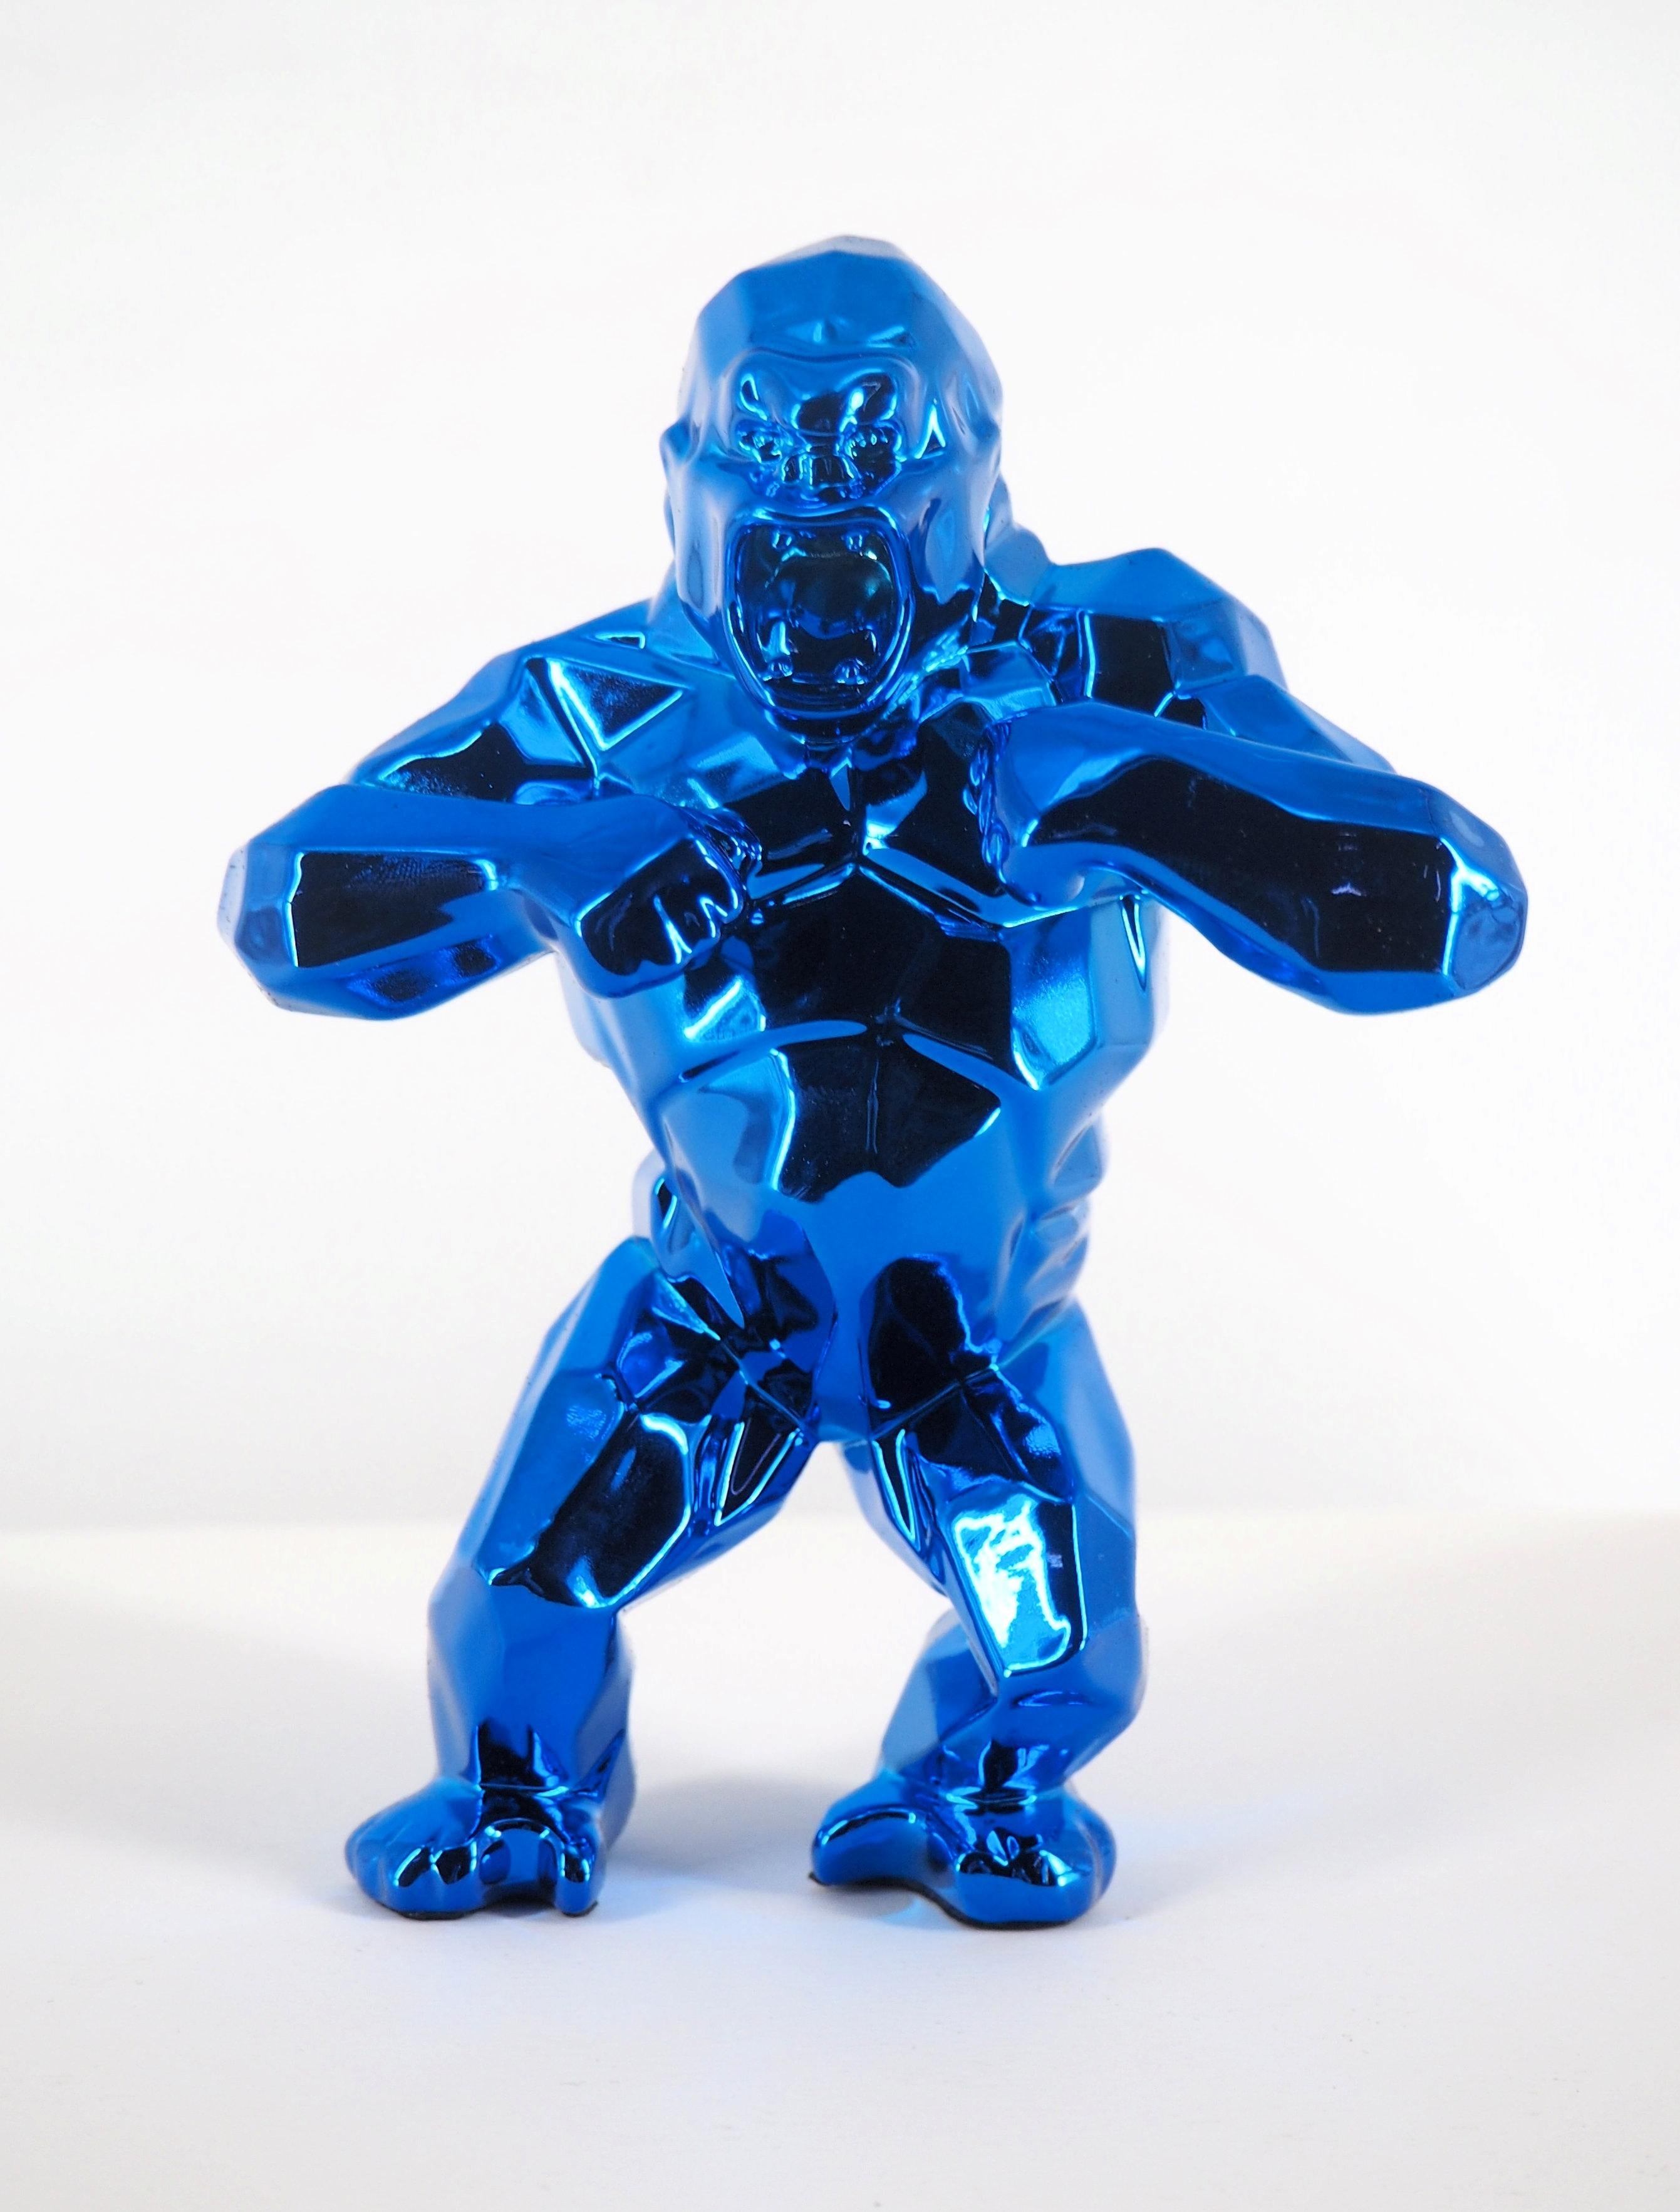 Kong Spirit (Blue edition) - Sculpture in original box with artist certificate For Sale 5